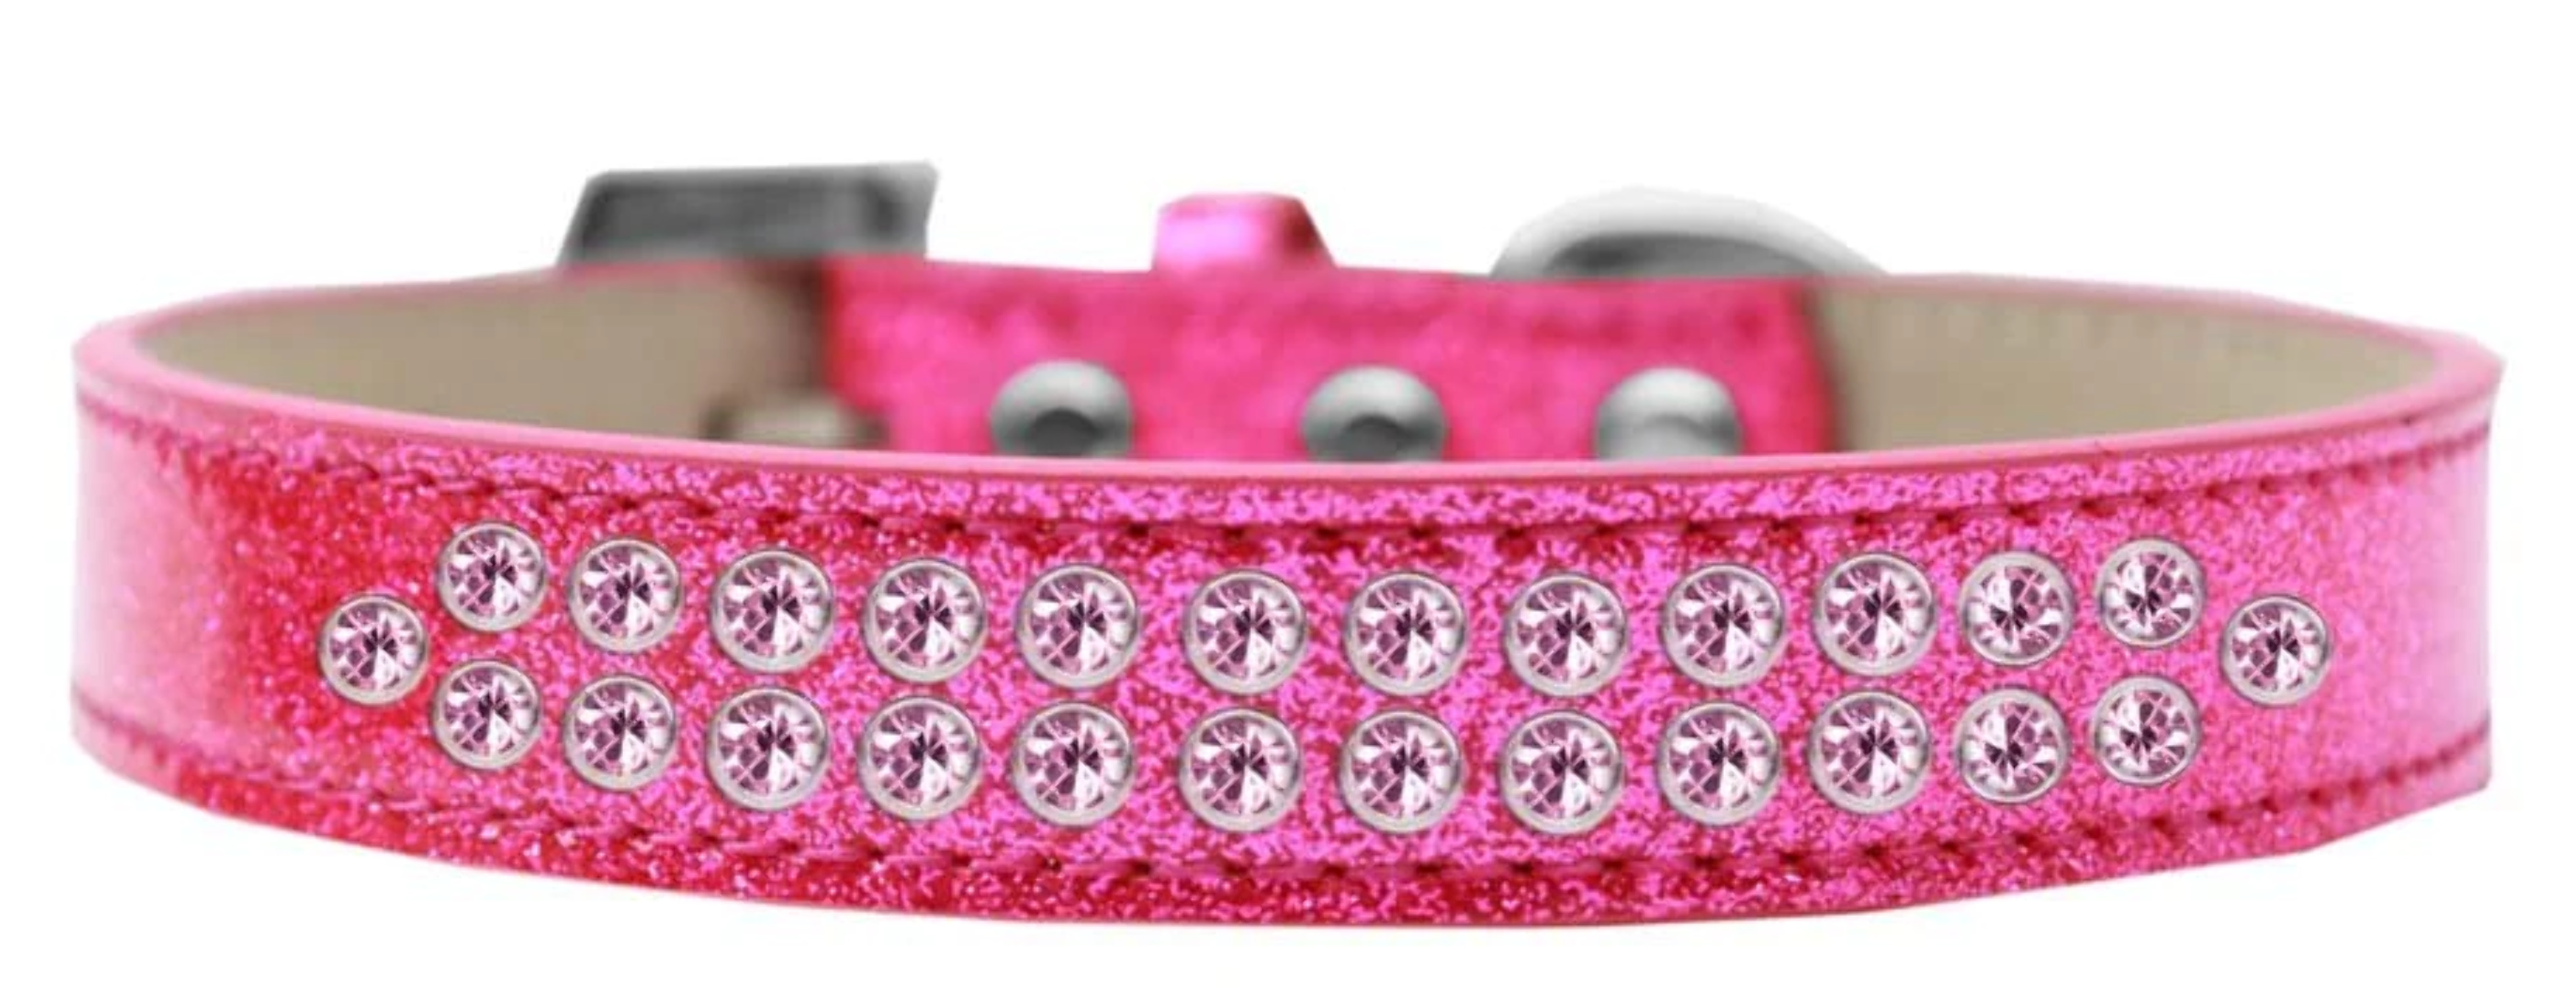 Mirage Pet Products614-06 PK-12 Two Row Light Pink Crystal Dog Collar, Pink Ice Cream - Size 12 - image 4 of 5